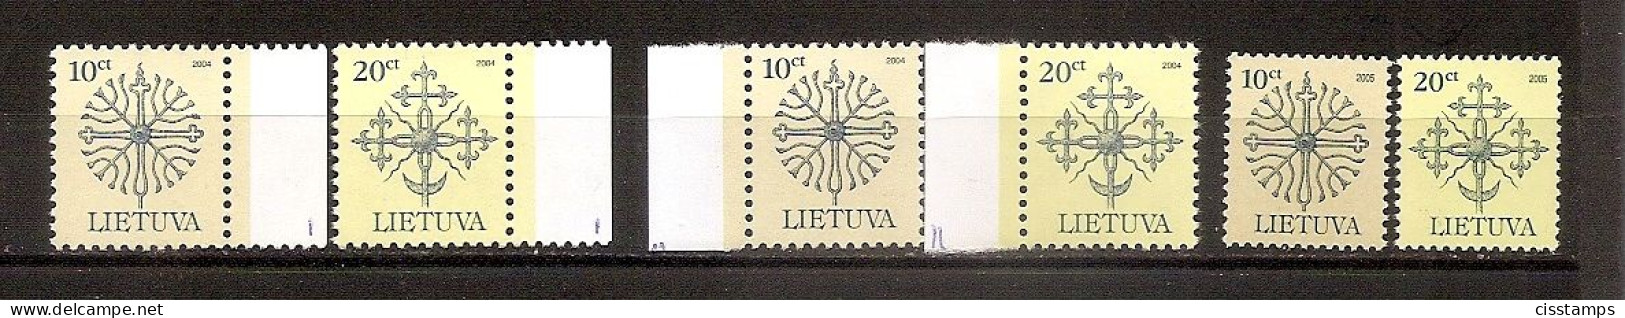 LITHUANIA 2004-2005●Definitive●Forged Tops Of Monuments●see Description●MNH - Lithuania